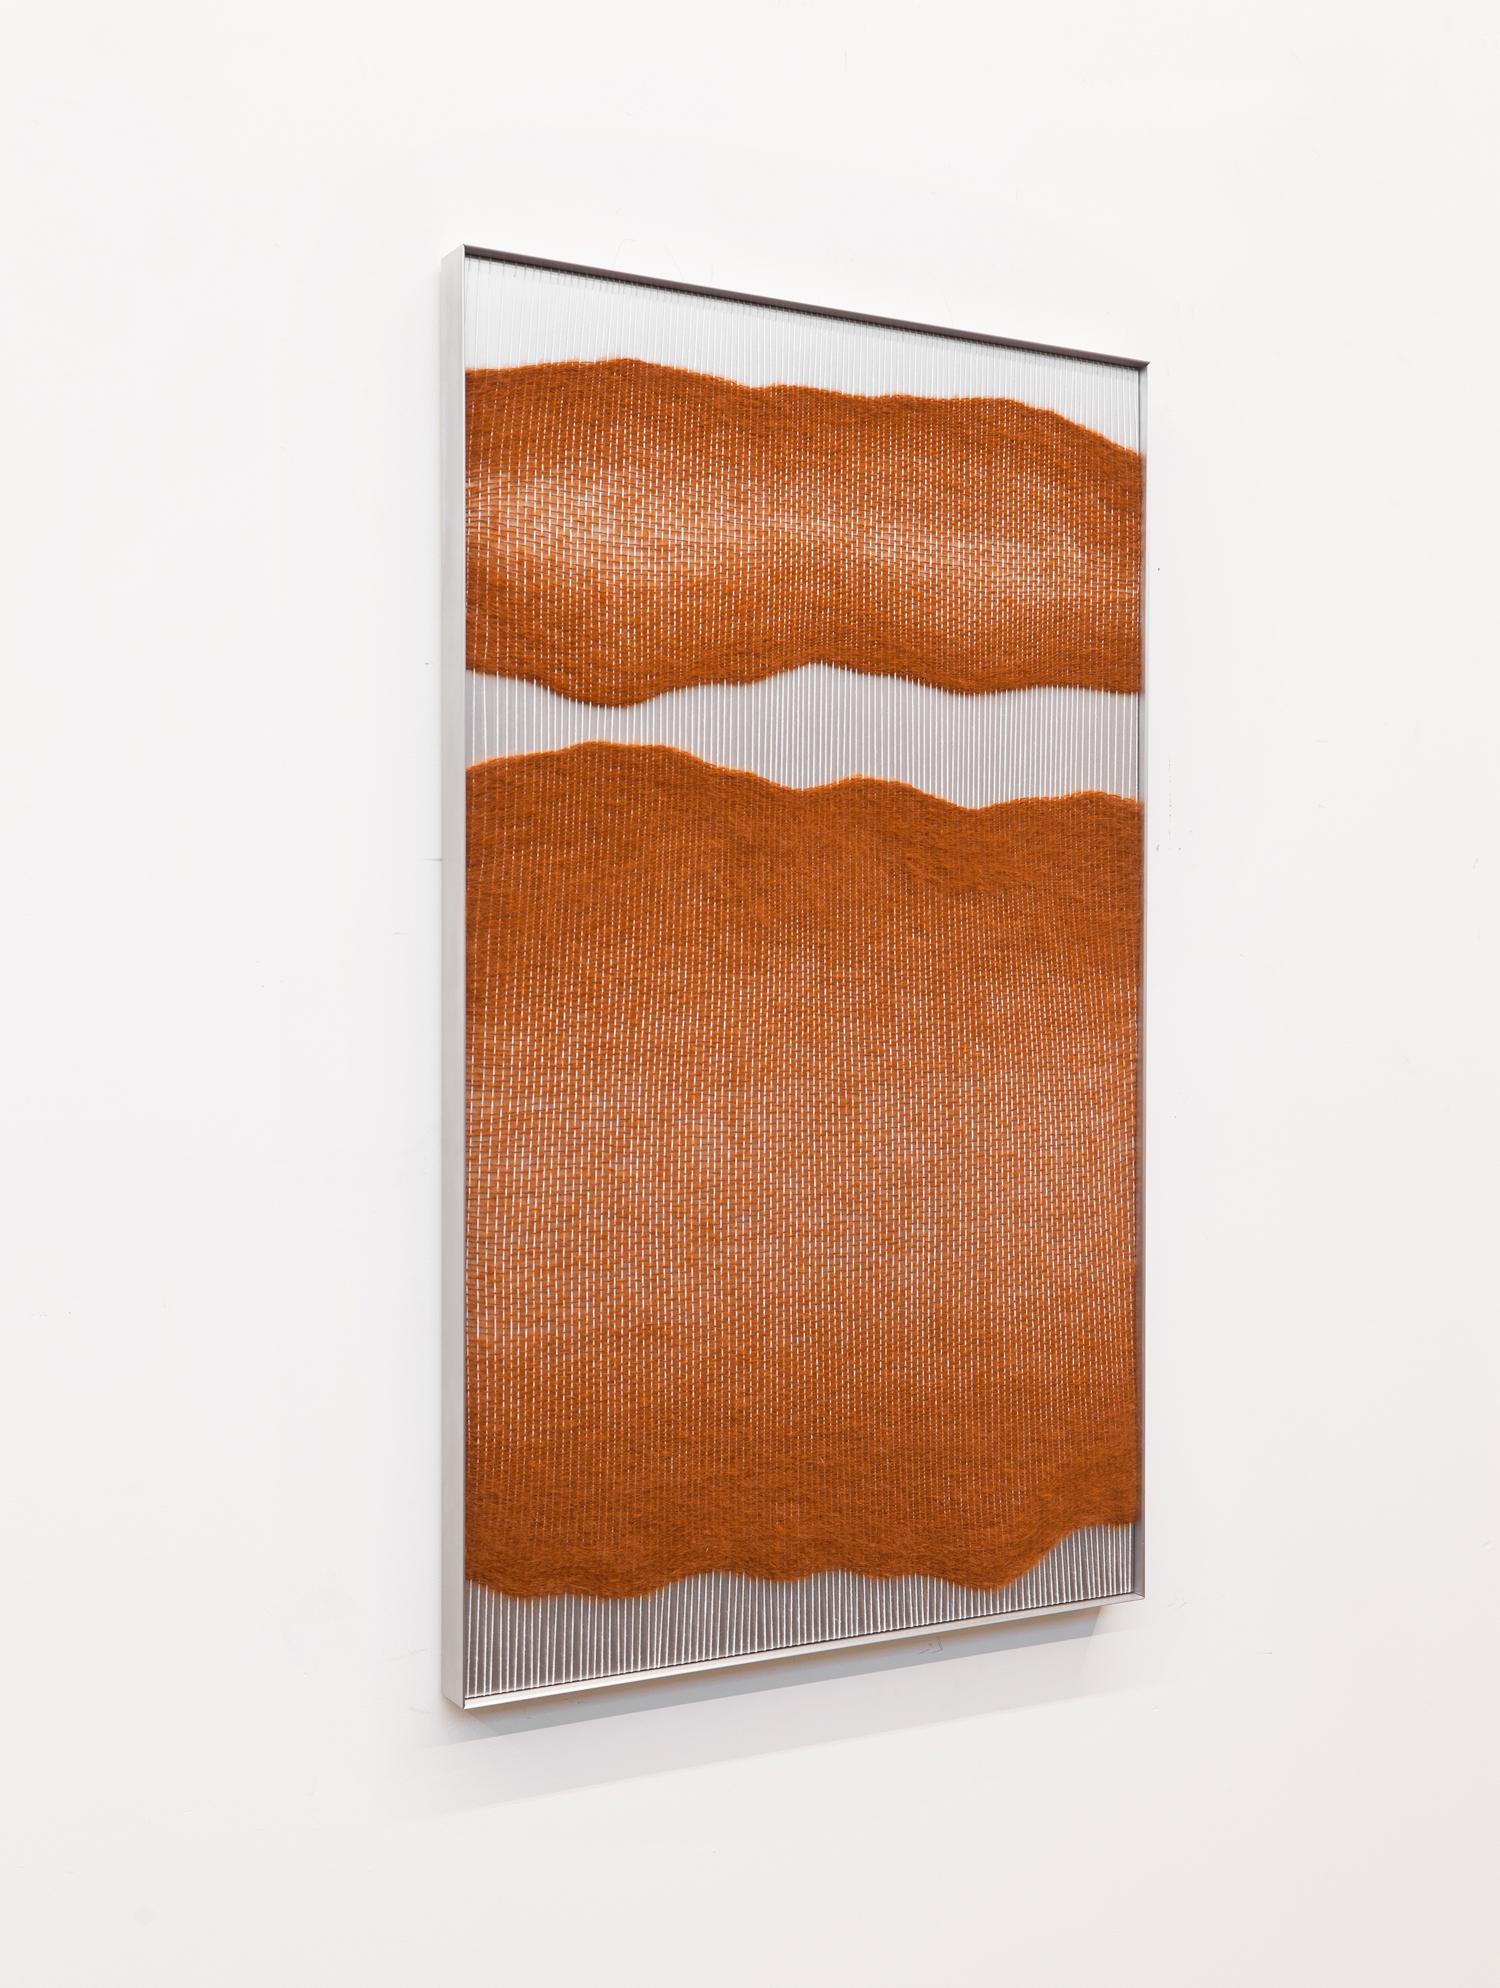 Rust edge forms
Measure: 30” x 50” x 2”.
2018
Colors: Rust, white and aluminum
Frame: Satin finish aluminum
Materials: Mohair, cotton and satin finish aluminum
Contemporary fiber art, weaving
Tapestry
Piece is currently in Los Angeles.